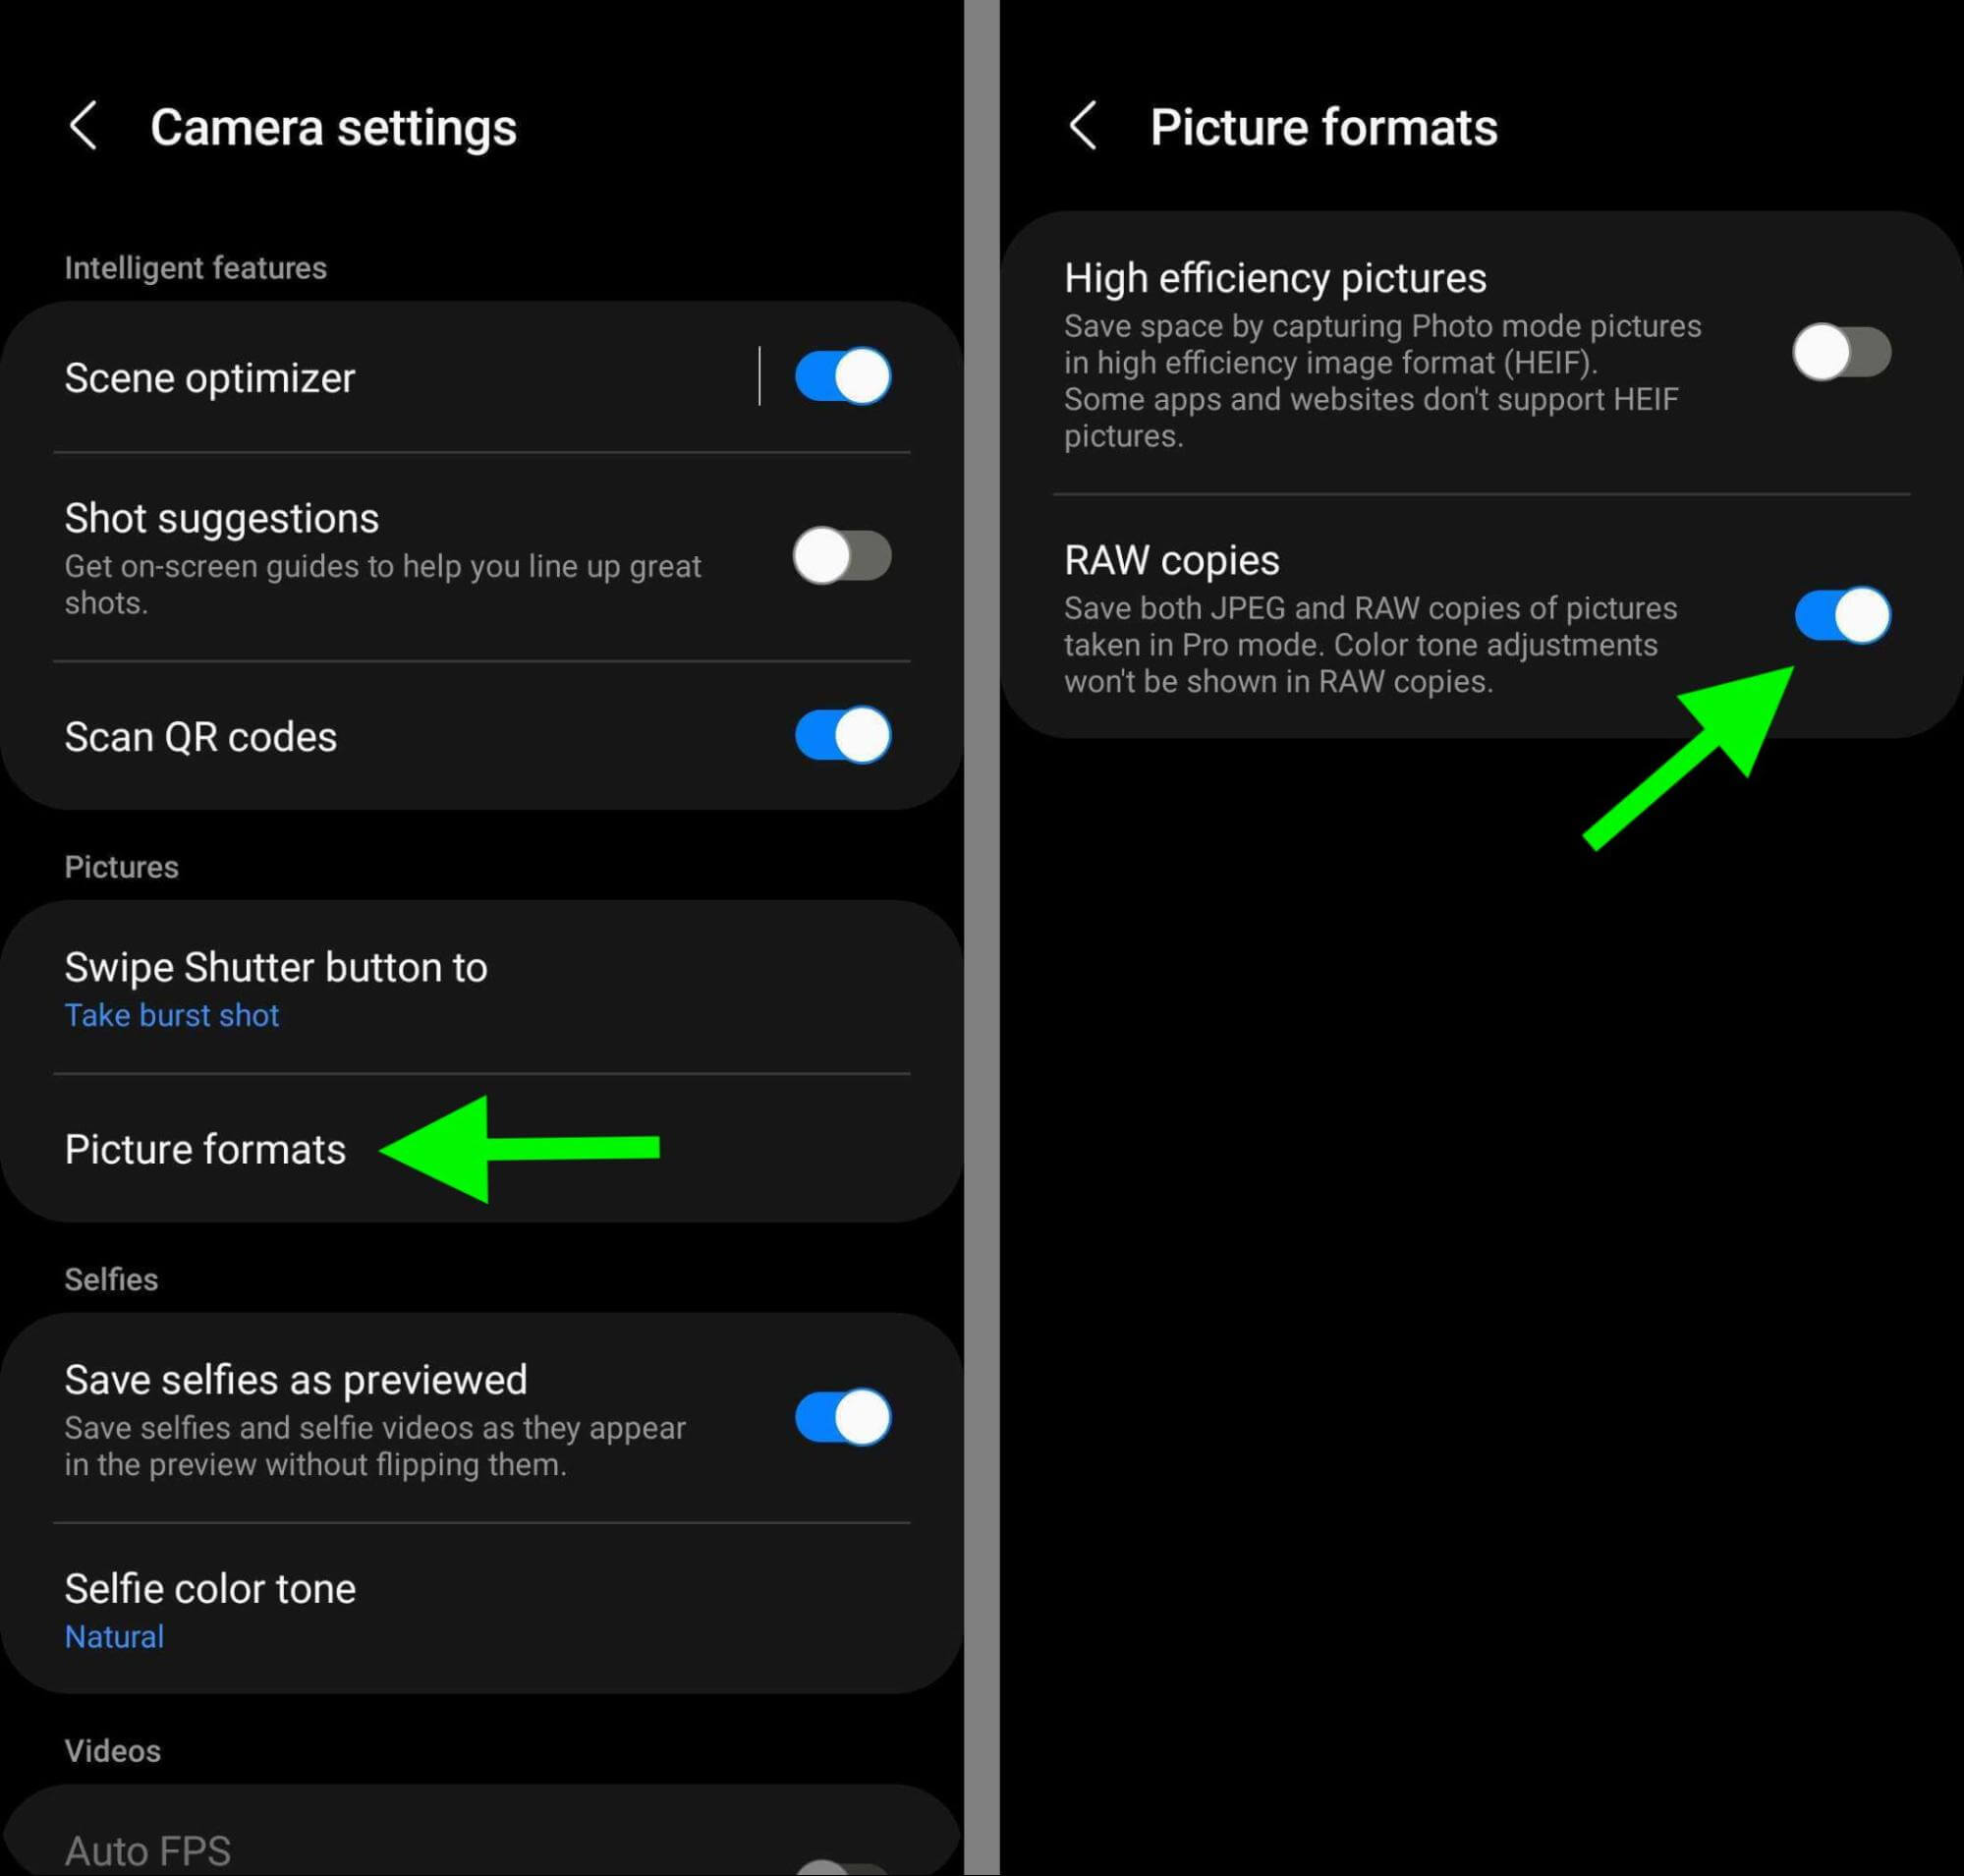 how-to-edit-photos-instagram-camera-settings-picture-formats-step-5